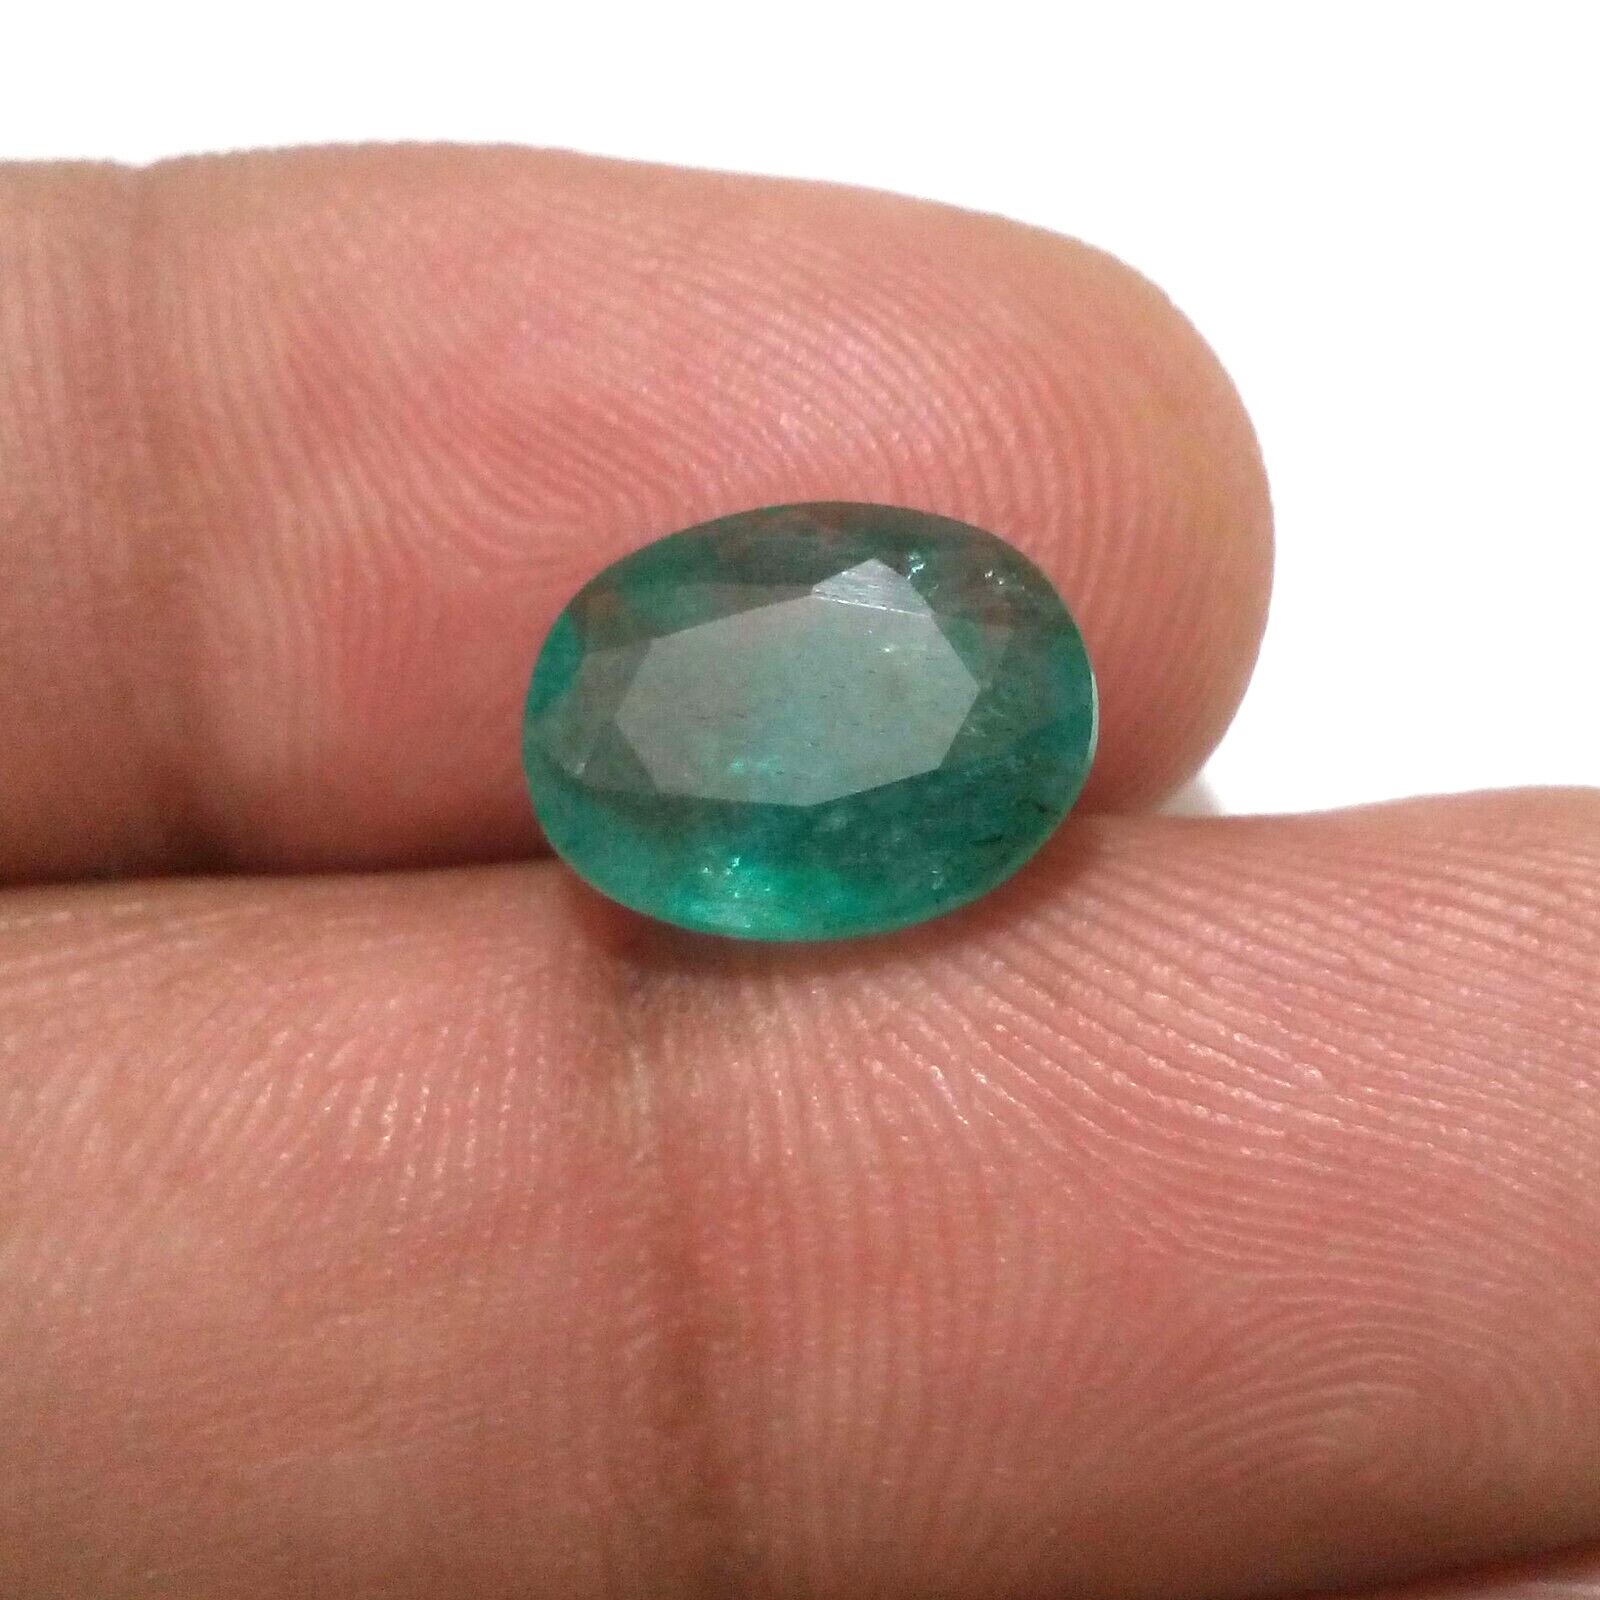 Outstanding Zambian Emerald Faceted Oval Shape 3.55 Crt Top Green Loose Gemstone